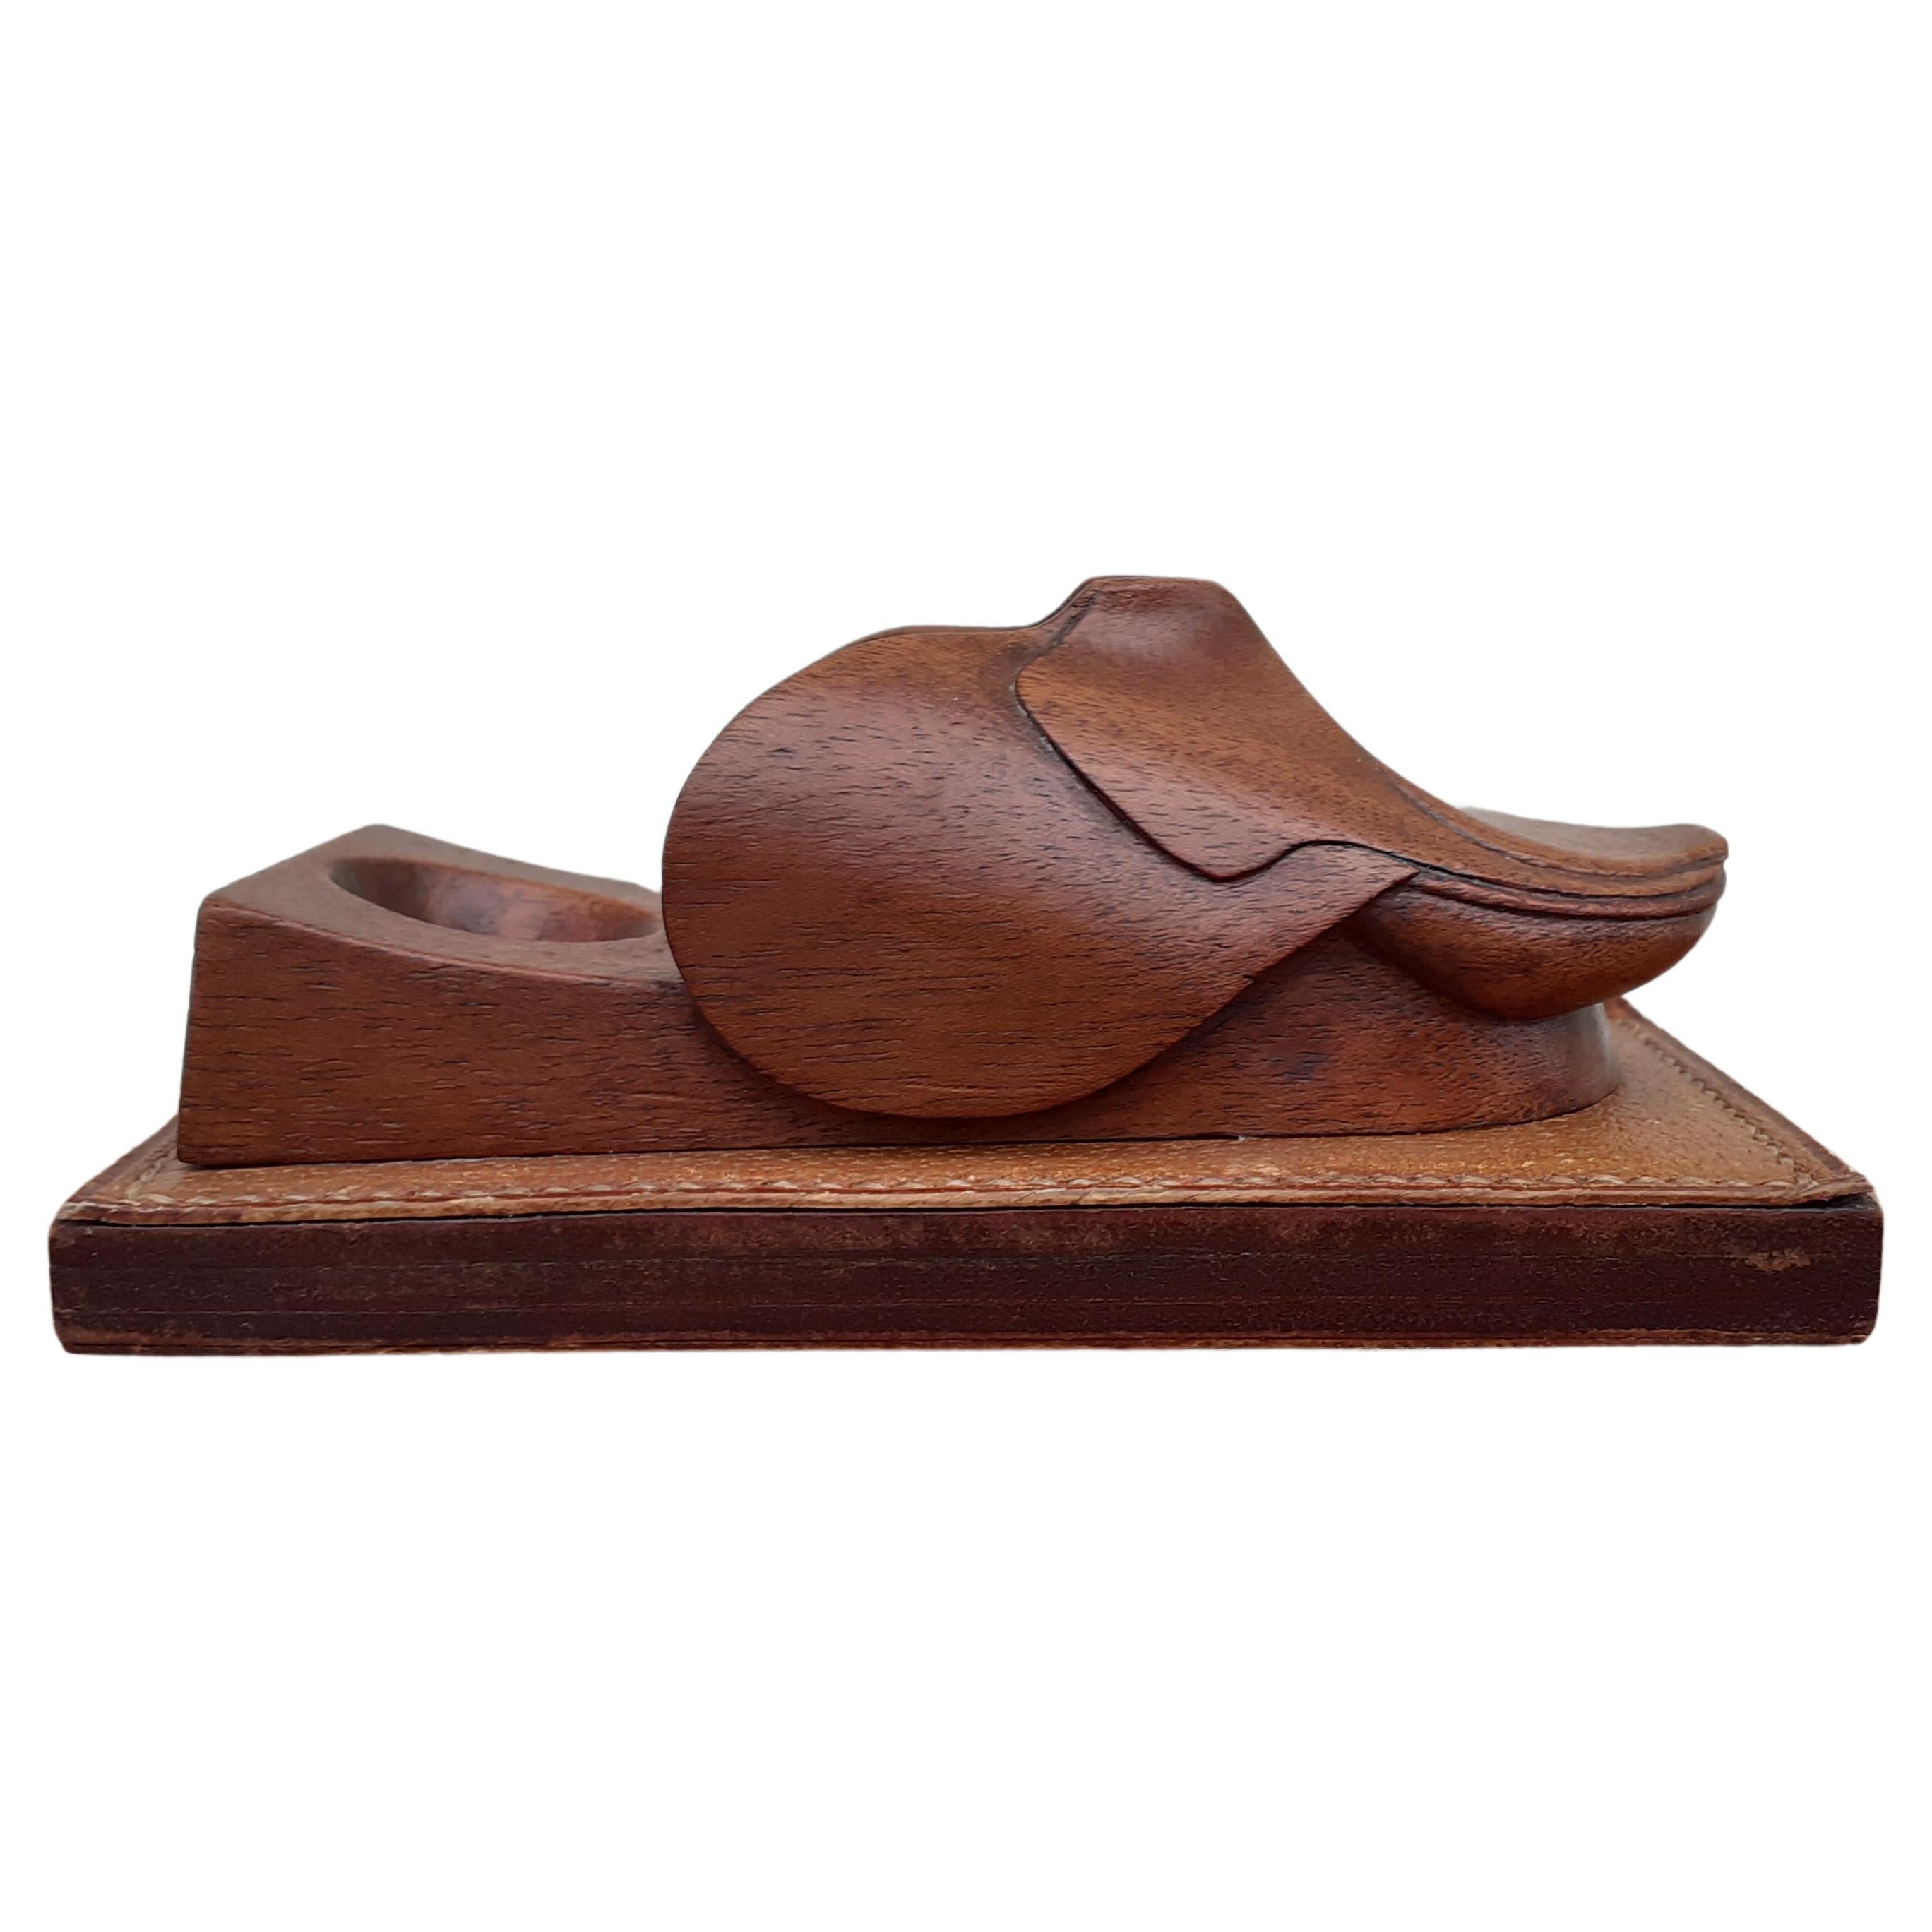 Stunning and Beautiful Authentic Hermès Pipe Holder

In carved wood in the shape of a small horse saddle

The wood is hollowed out so that a pipe can be placed there, the saddle serving as a support

Super cute, would fit any horse ridding